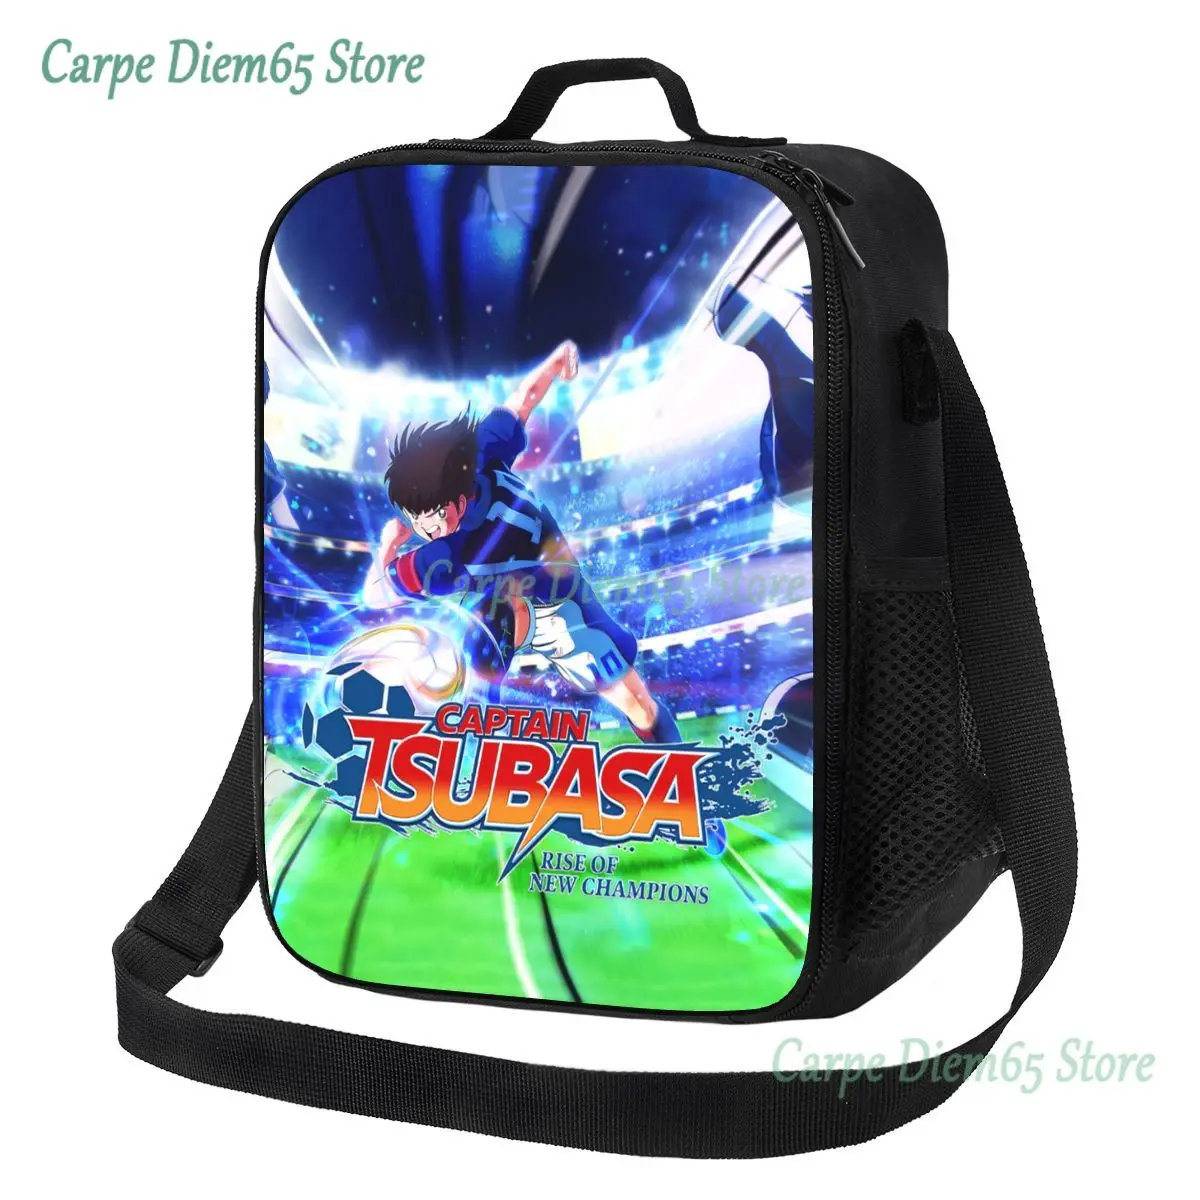 

Captain Tsubasa Resuable Lunch Boxes for Leakproof Anime Boy Football Motion Cooler Thermal Food Insulated Lunch Bag Office Work